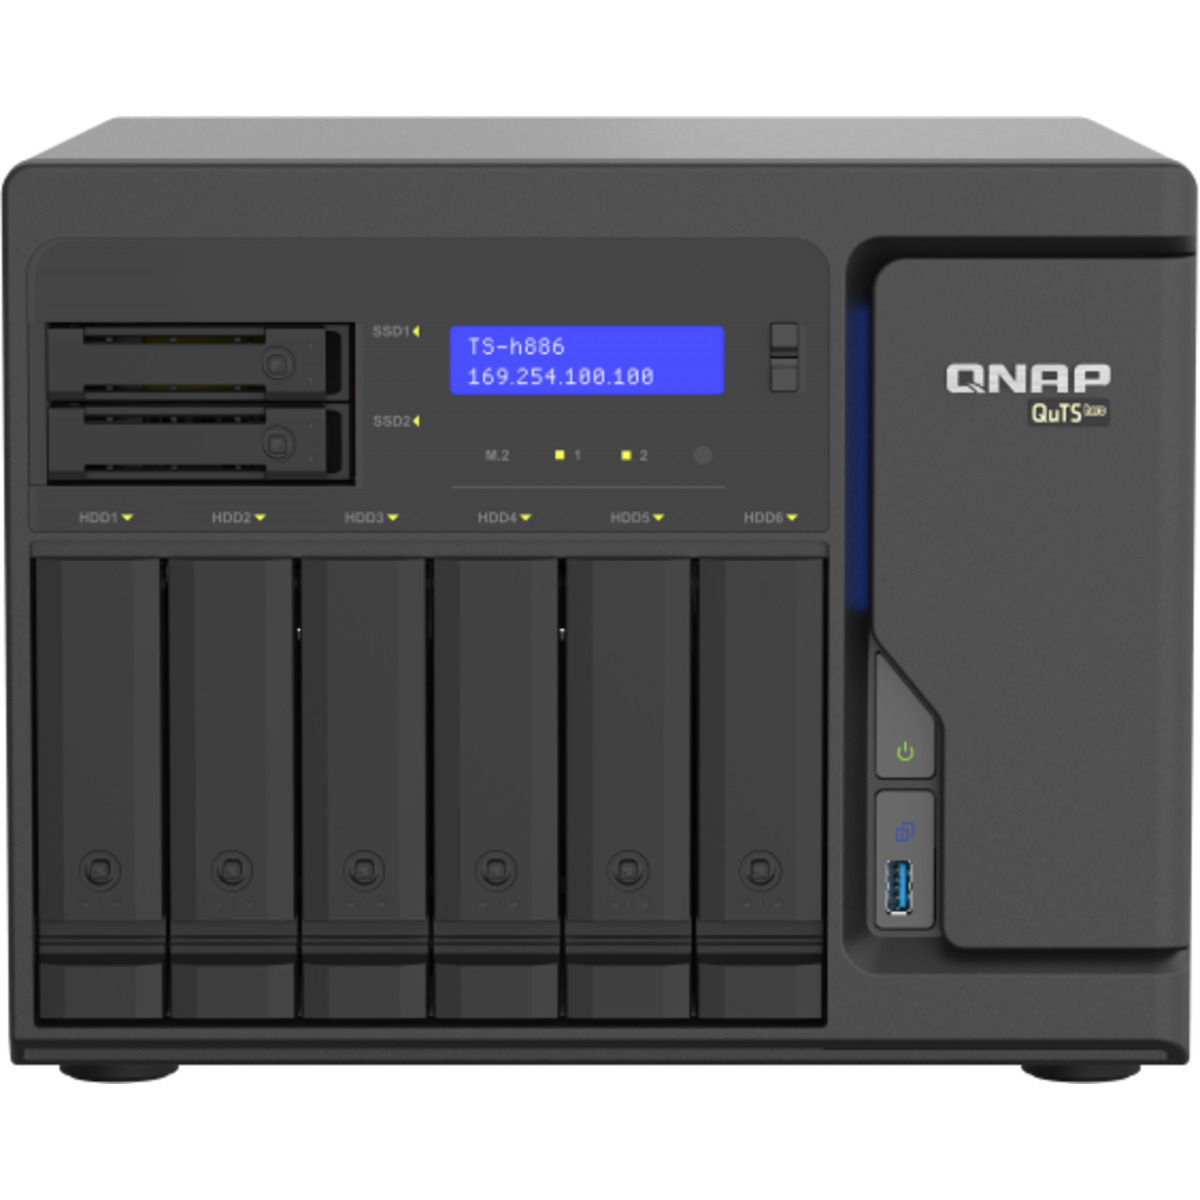 QNAP TS-h886 QuTS hero NAS 2tb 6+2-Bay Desktop Large Business / Enterprise NAS - Network Attached Storage Device 4x500gb Crucial MX500 CT500MX500SSD1 2.5 560/510MB/s SATA 6Gb/s SSD CONSUMER Class Drives Installed - Burn-In Tested TS-h886 QuTS hero NAS